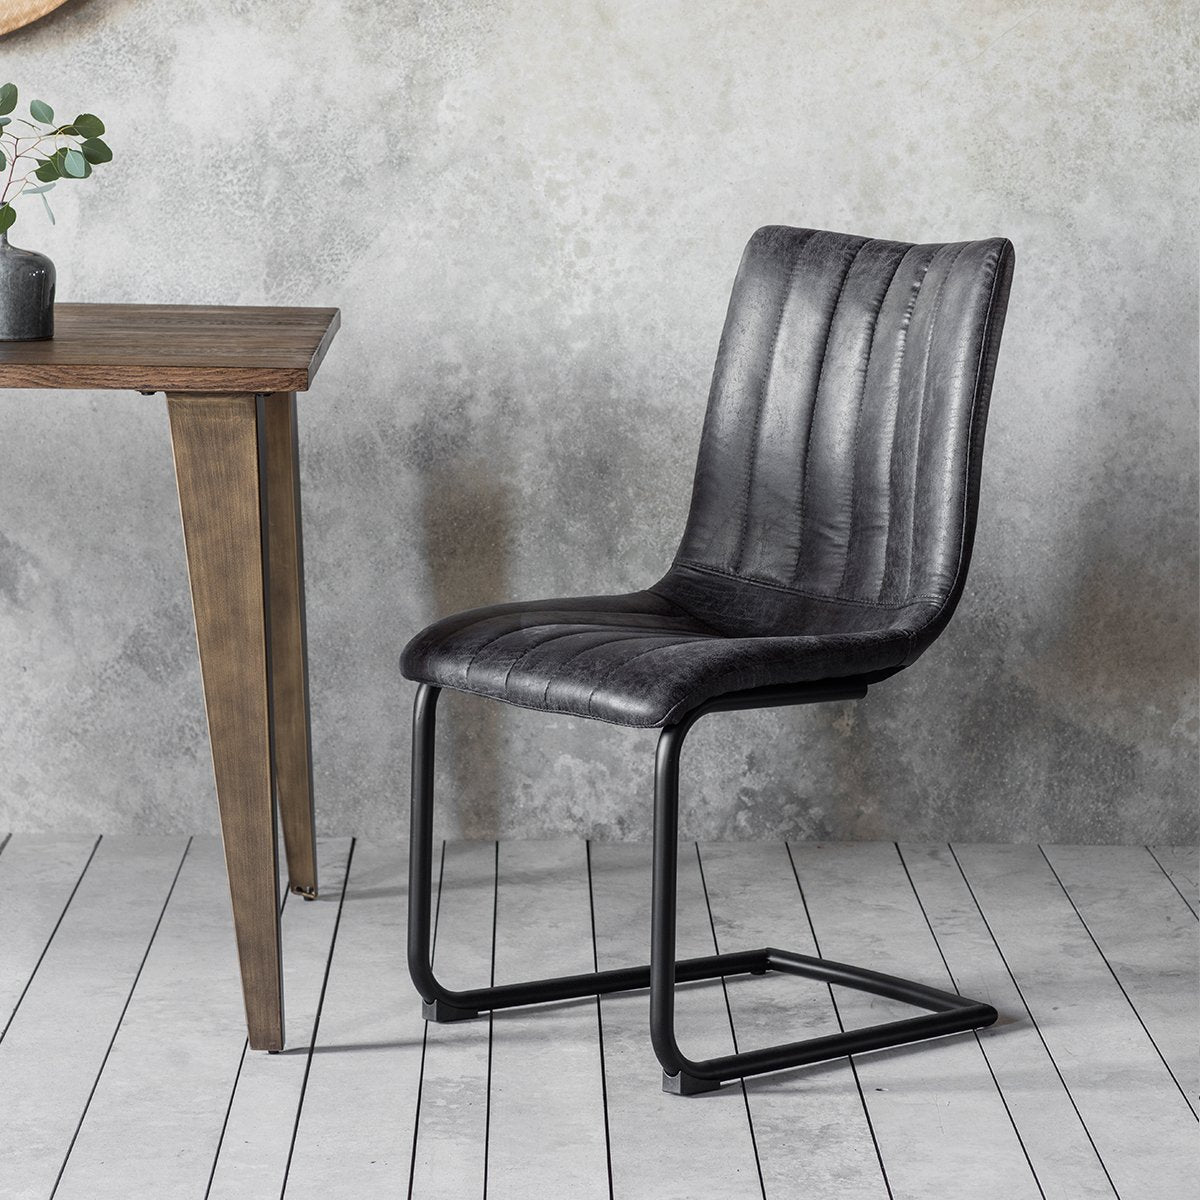 Gallery Interiors Set Of 2 Edington Faux Leather Grey Dining Chairs Outlet